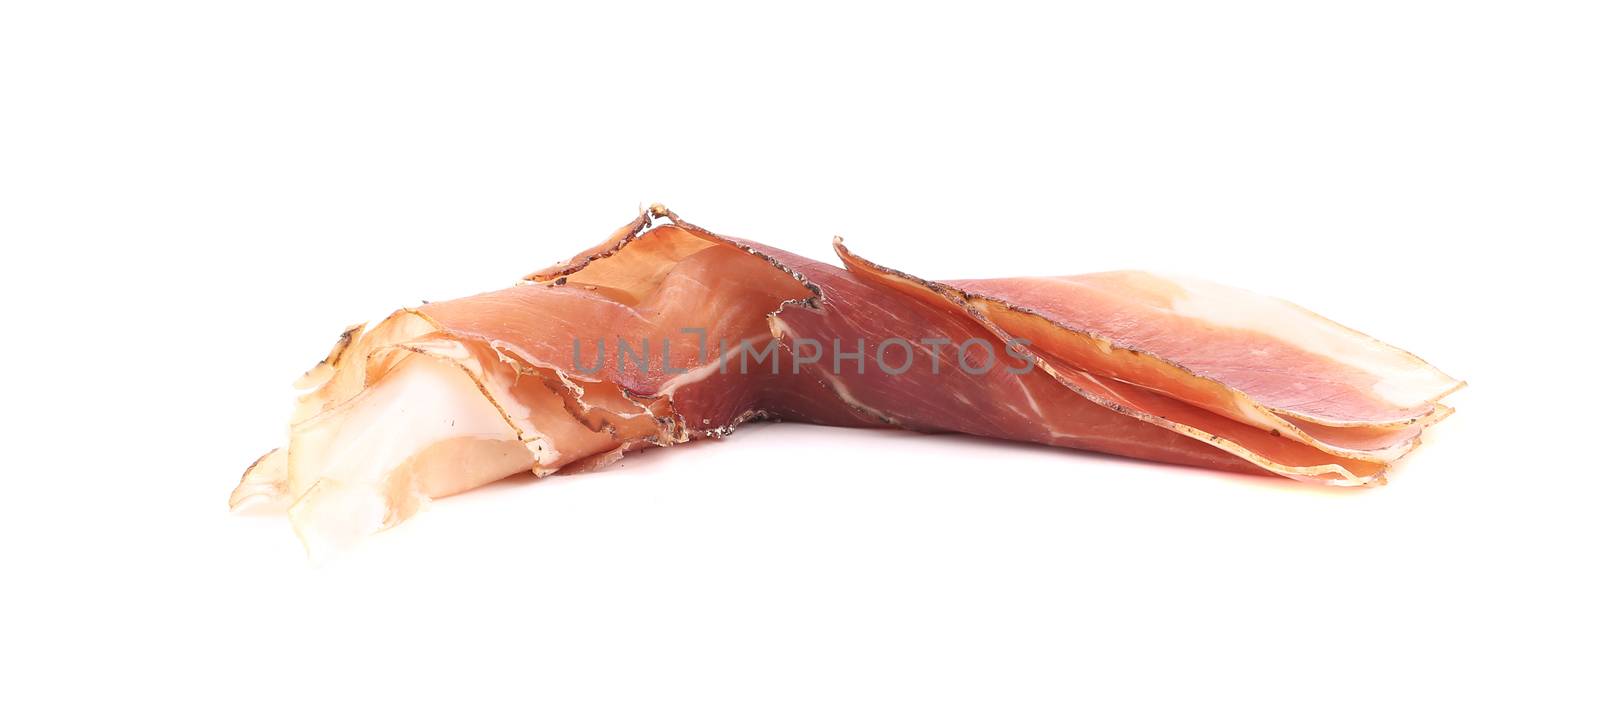 Rolled Slice of Delicious Prosciutto. Isolated on a white background.